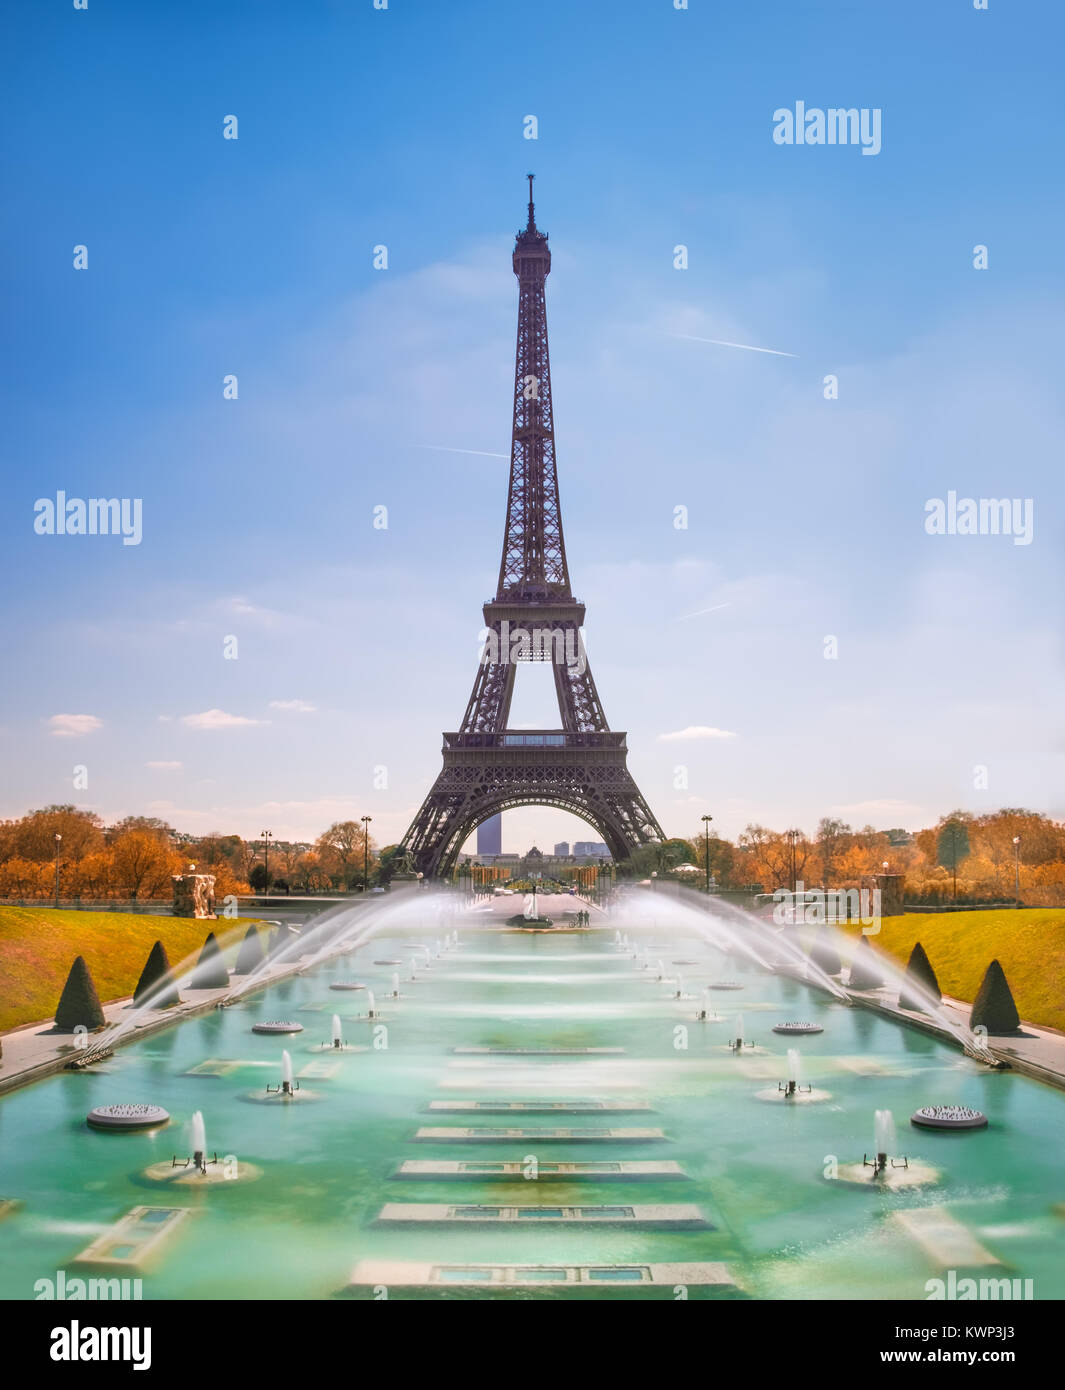 Paris. Eiffel Tower and Trocadero fountains on a sunny day in Fall Stock Photo